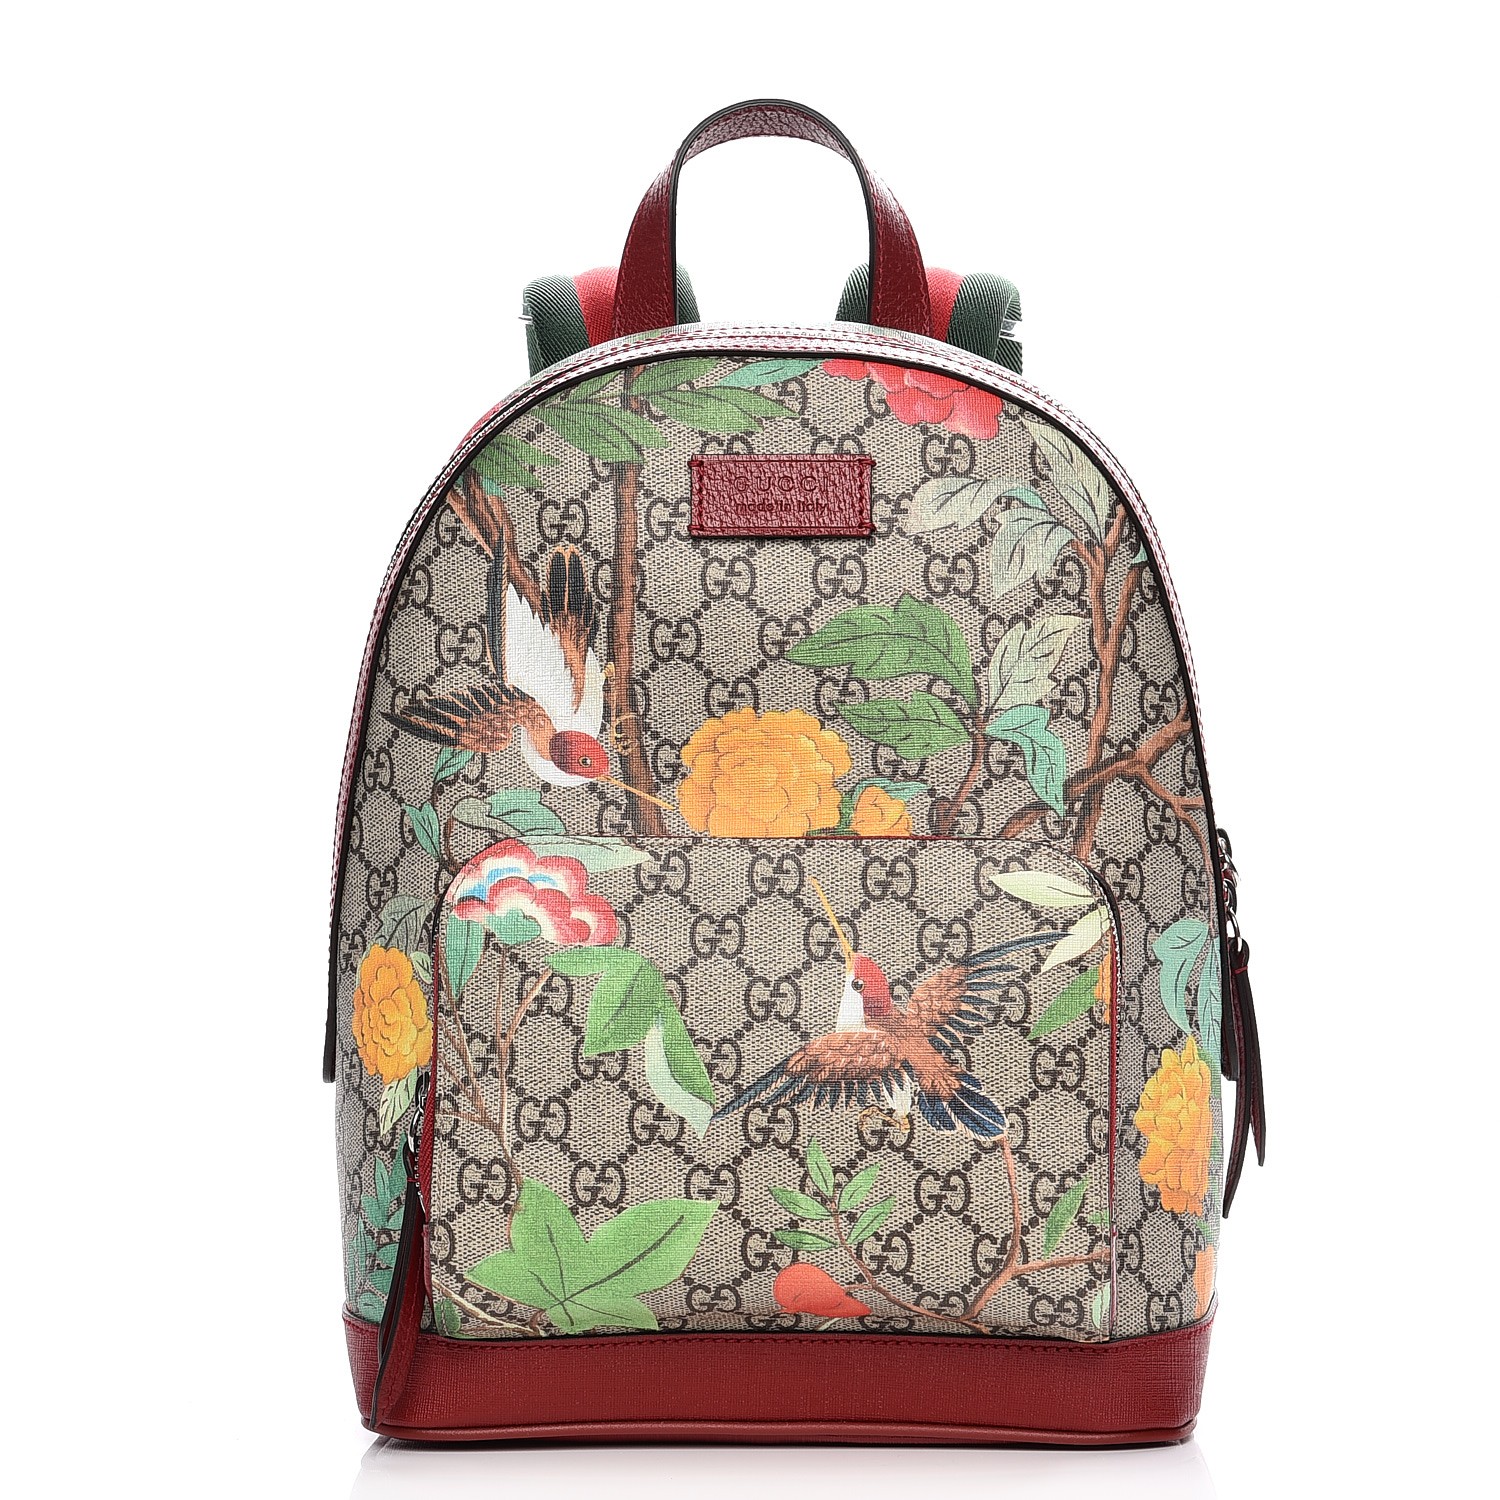 GUCCI GG Supreme Monogram Small Tian Print Backpack Red 212723